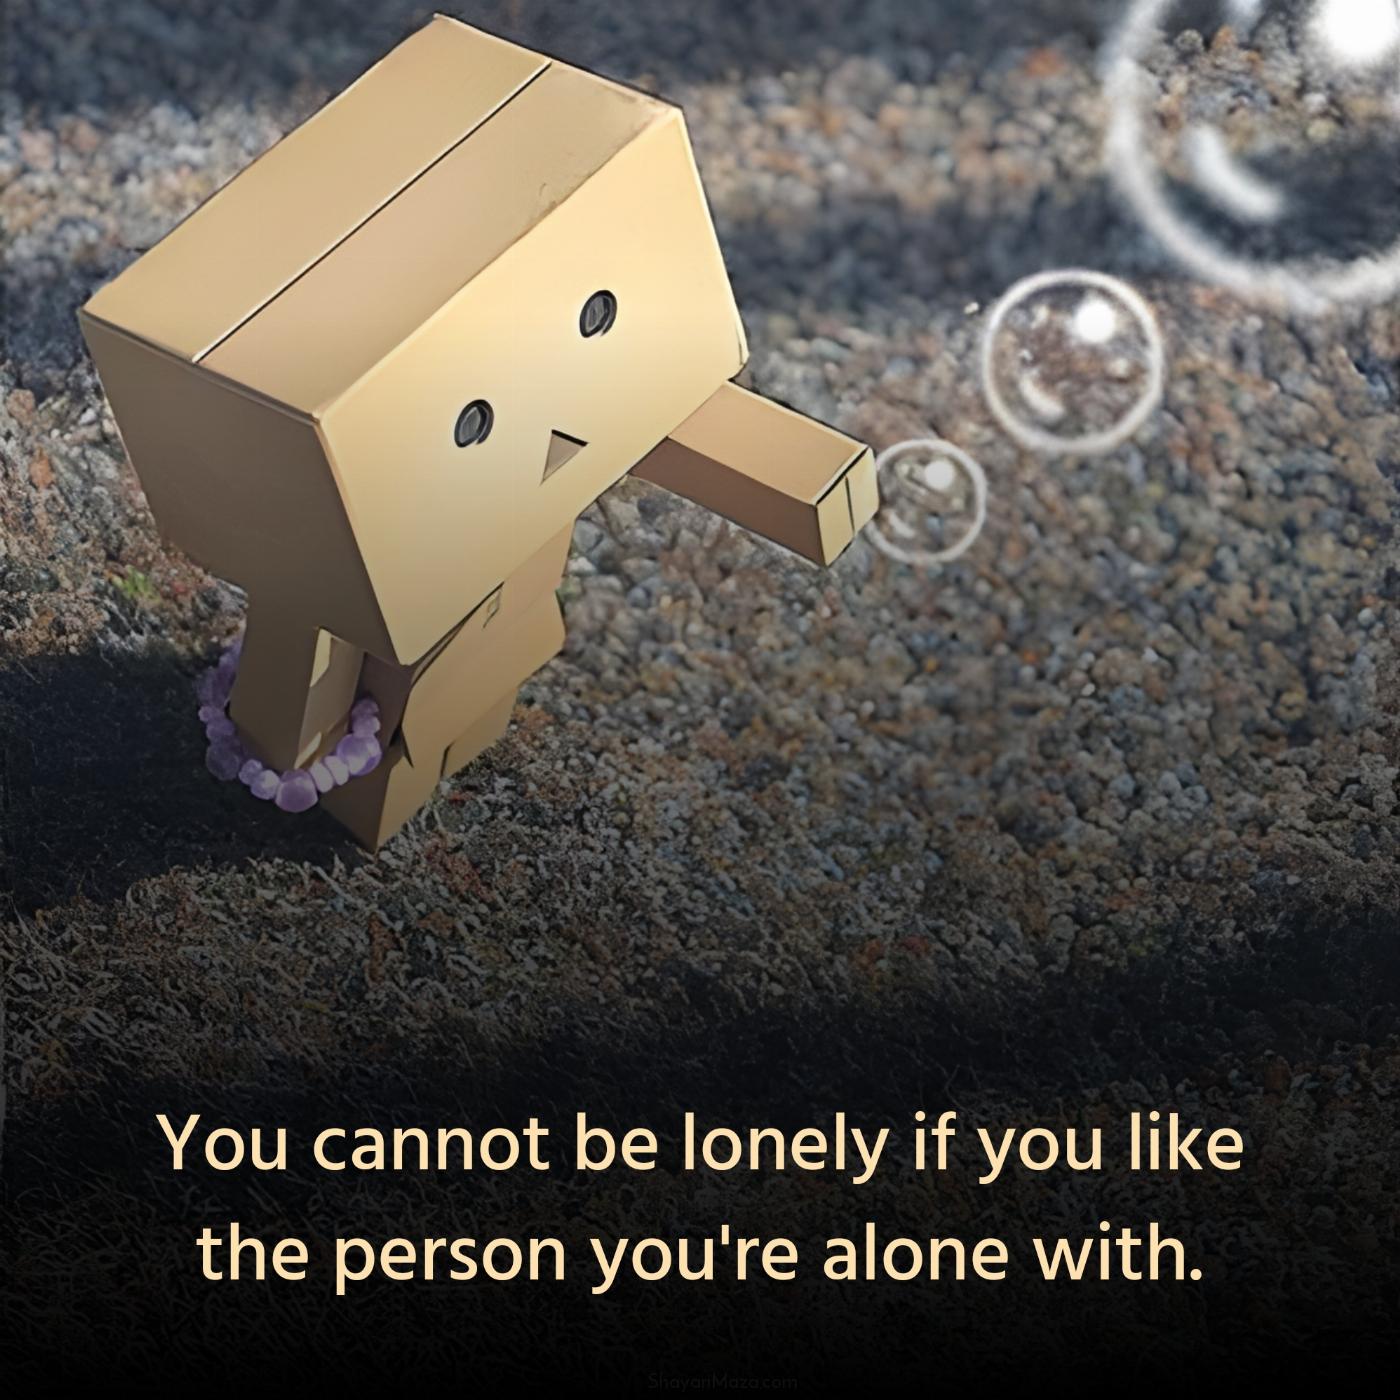 You cannot be lonely if you like the person you're alone with